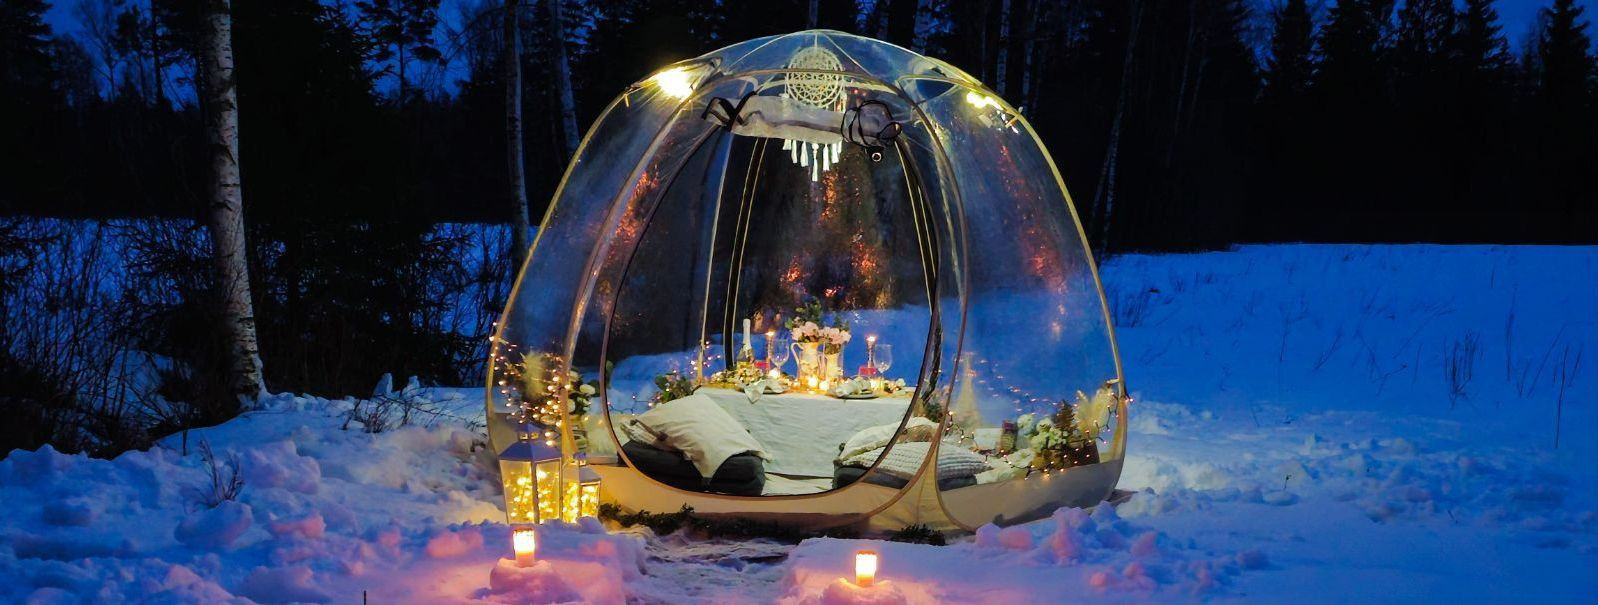 Bubble tents are a revolutionary form of accommodation that combines the allure of the great outdoors with the comfort of a luxury hotel room. These transparent